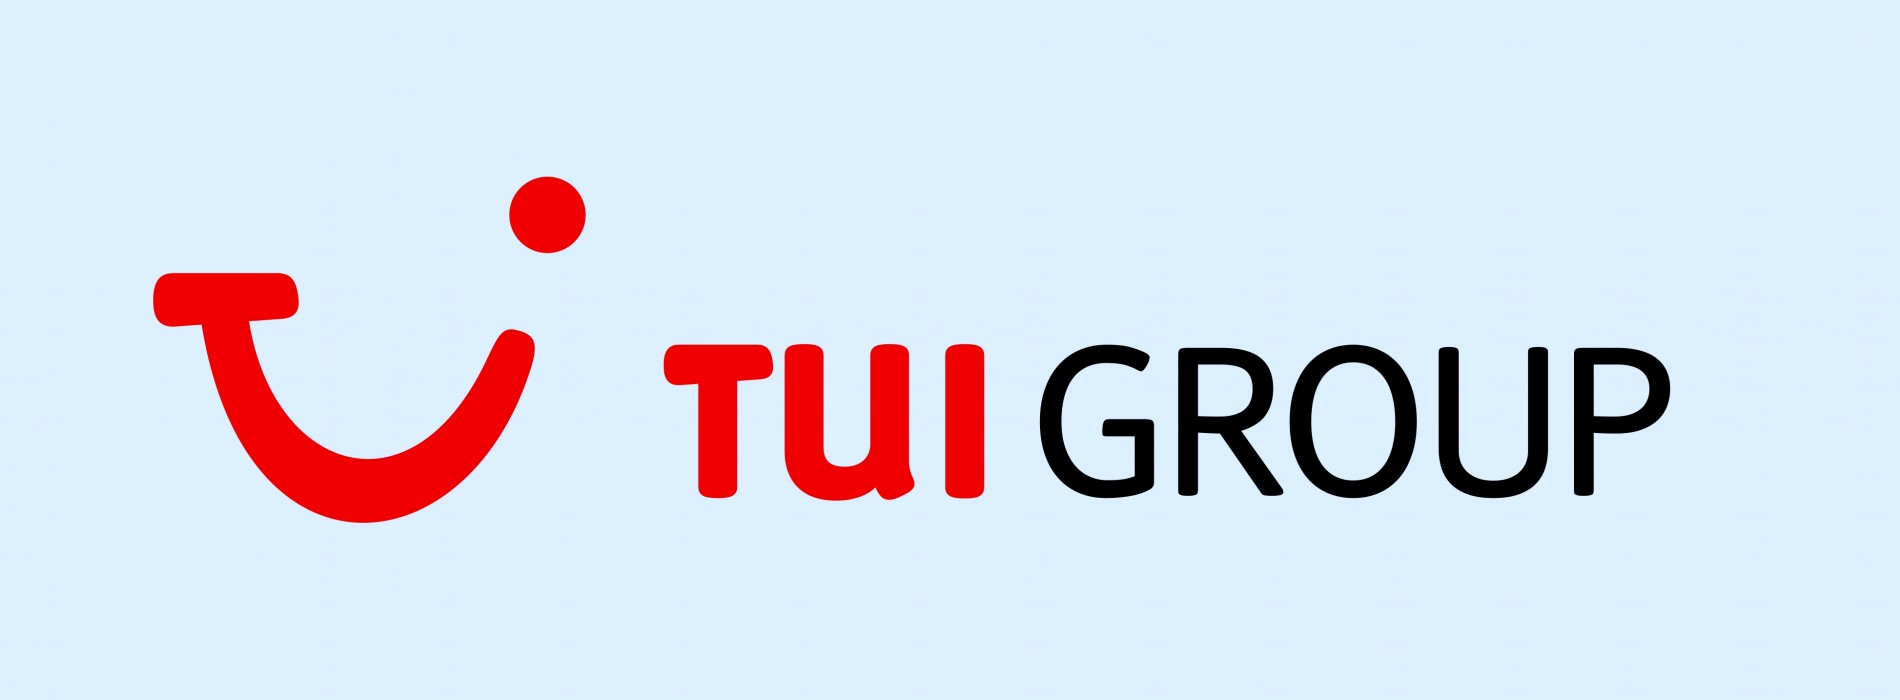 Tourism firm TUI Group aims to tap India’s booming online travel market